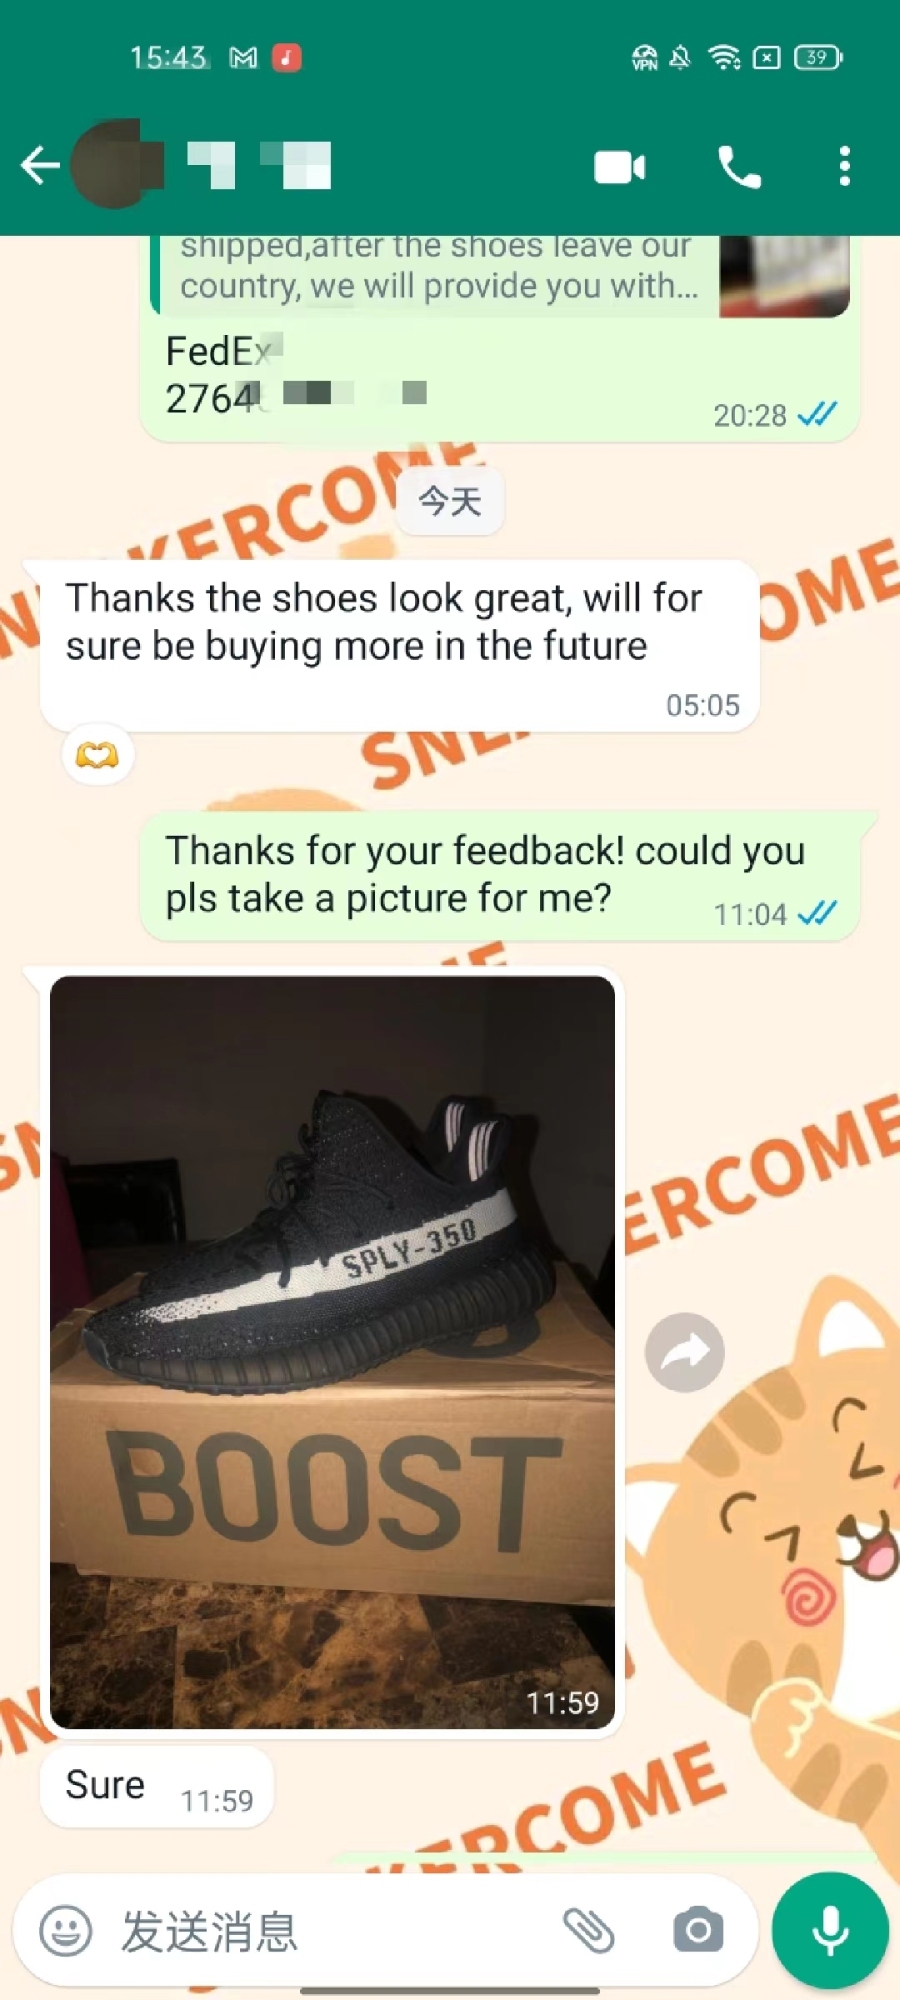 Review of Adidas Yeezy Boost 350 V2 Core Black White BY1604 from sneakercome customer💕